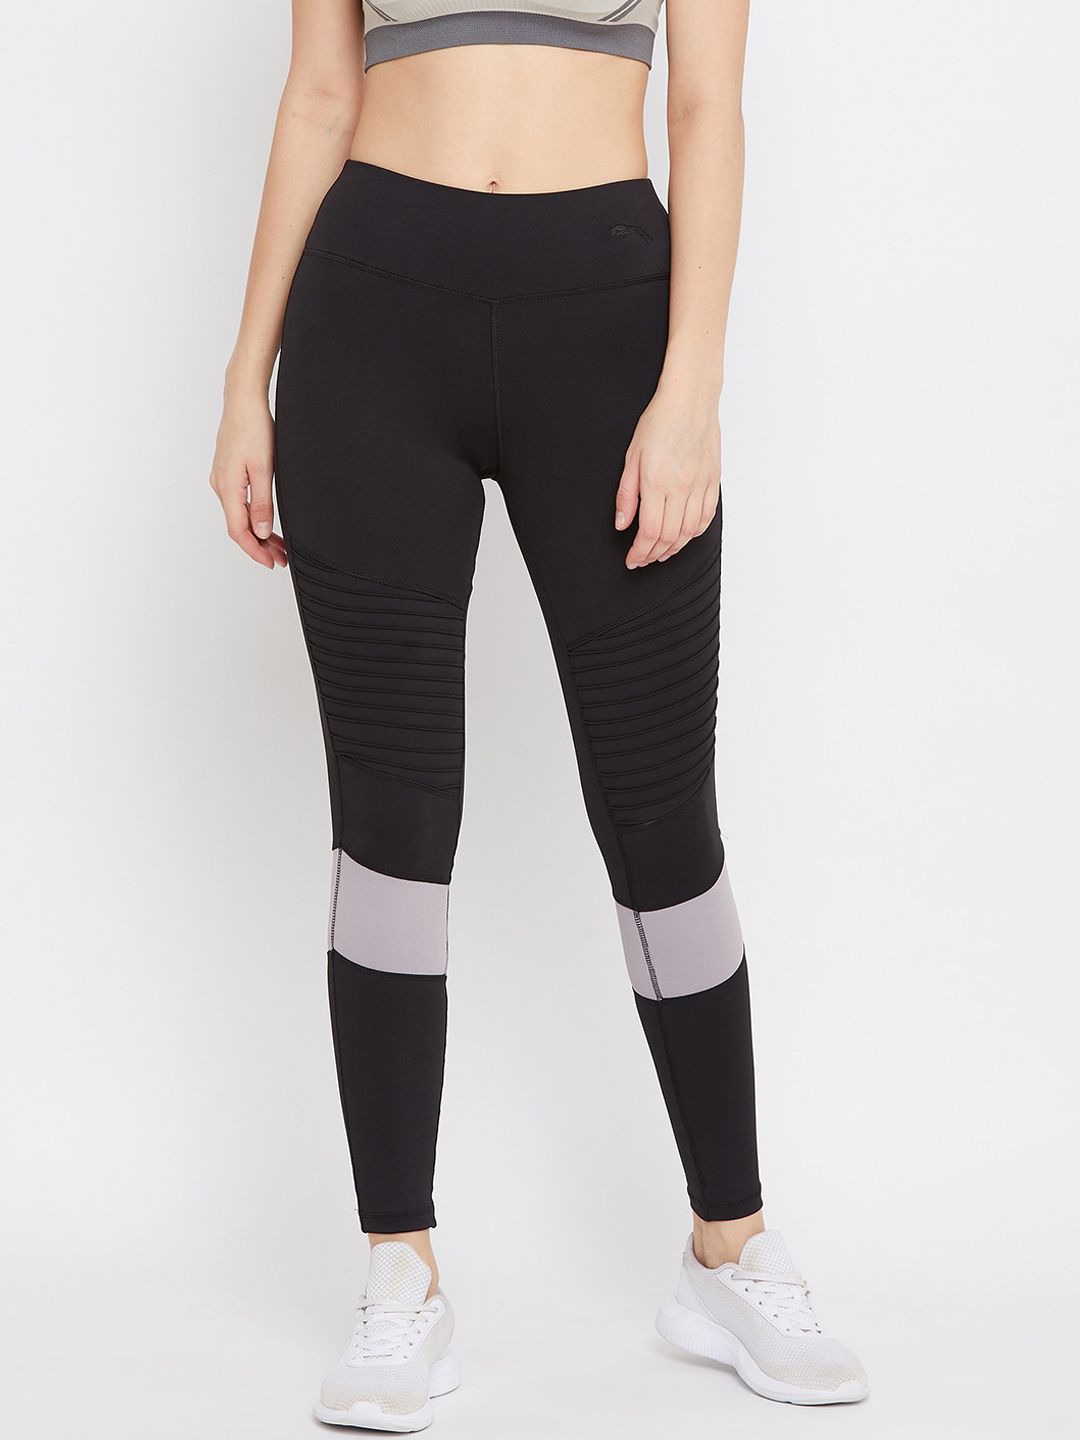 JUMP USA Women Black Solid Training Tights Price in India